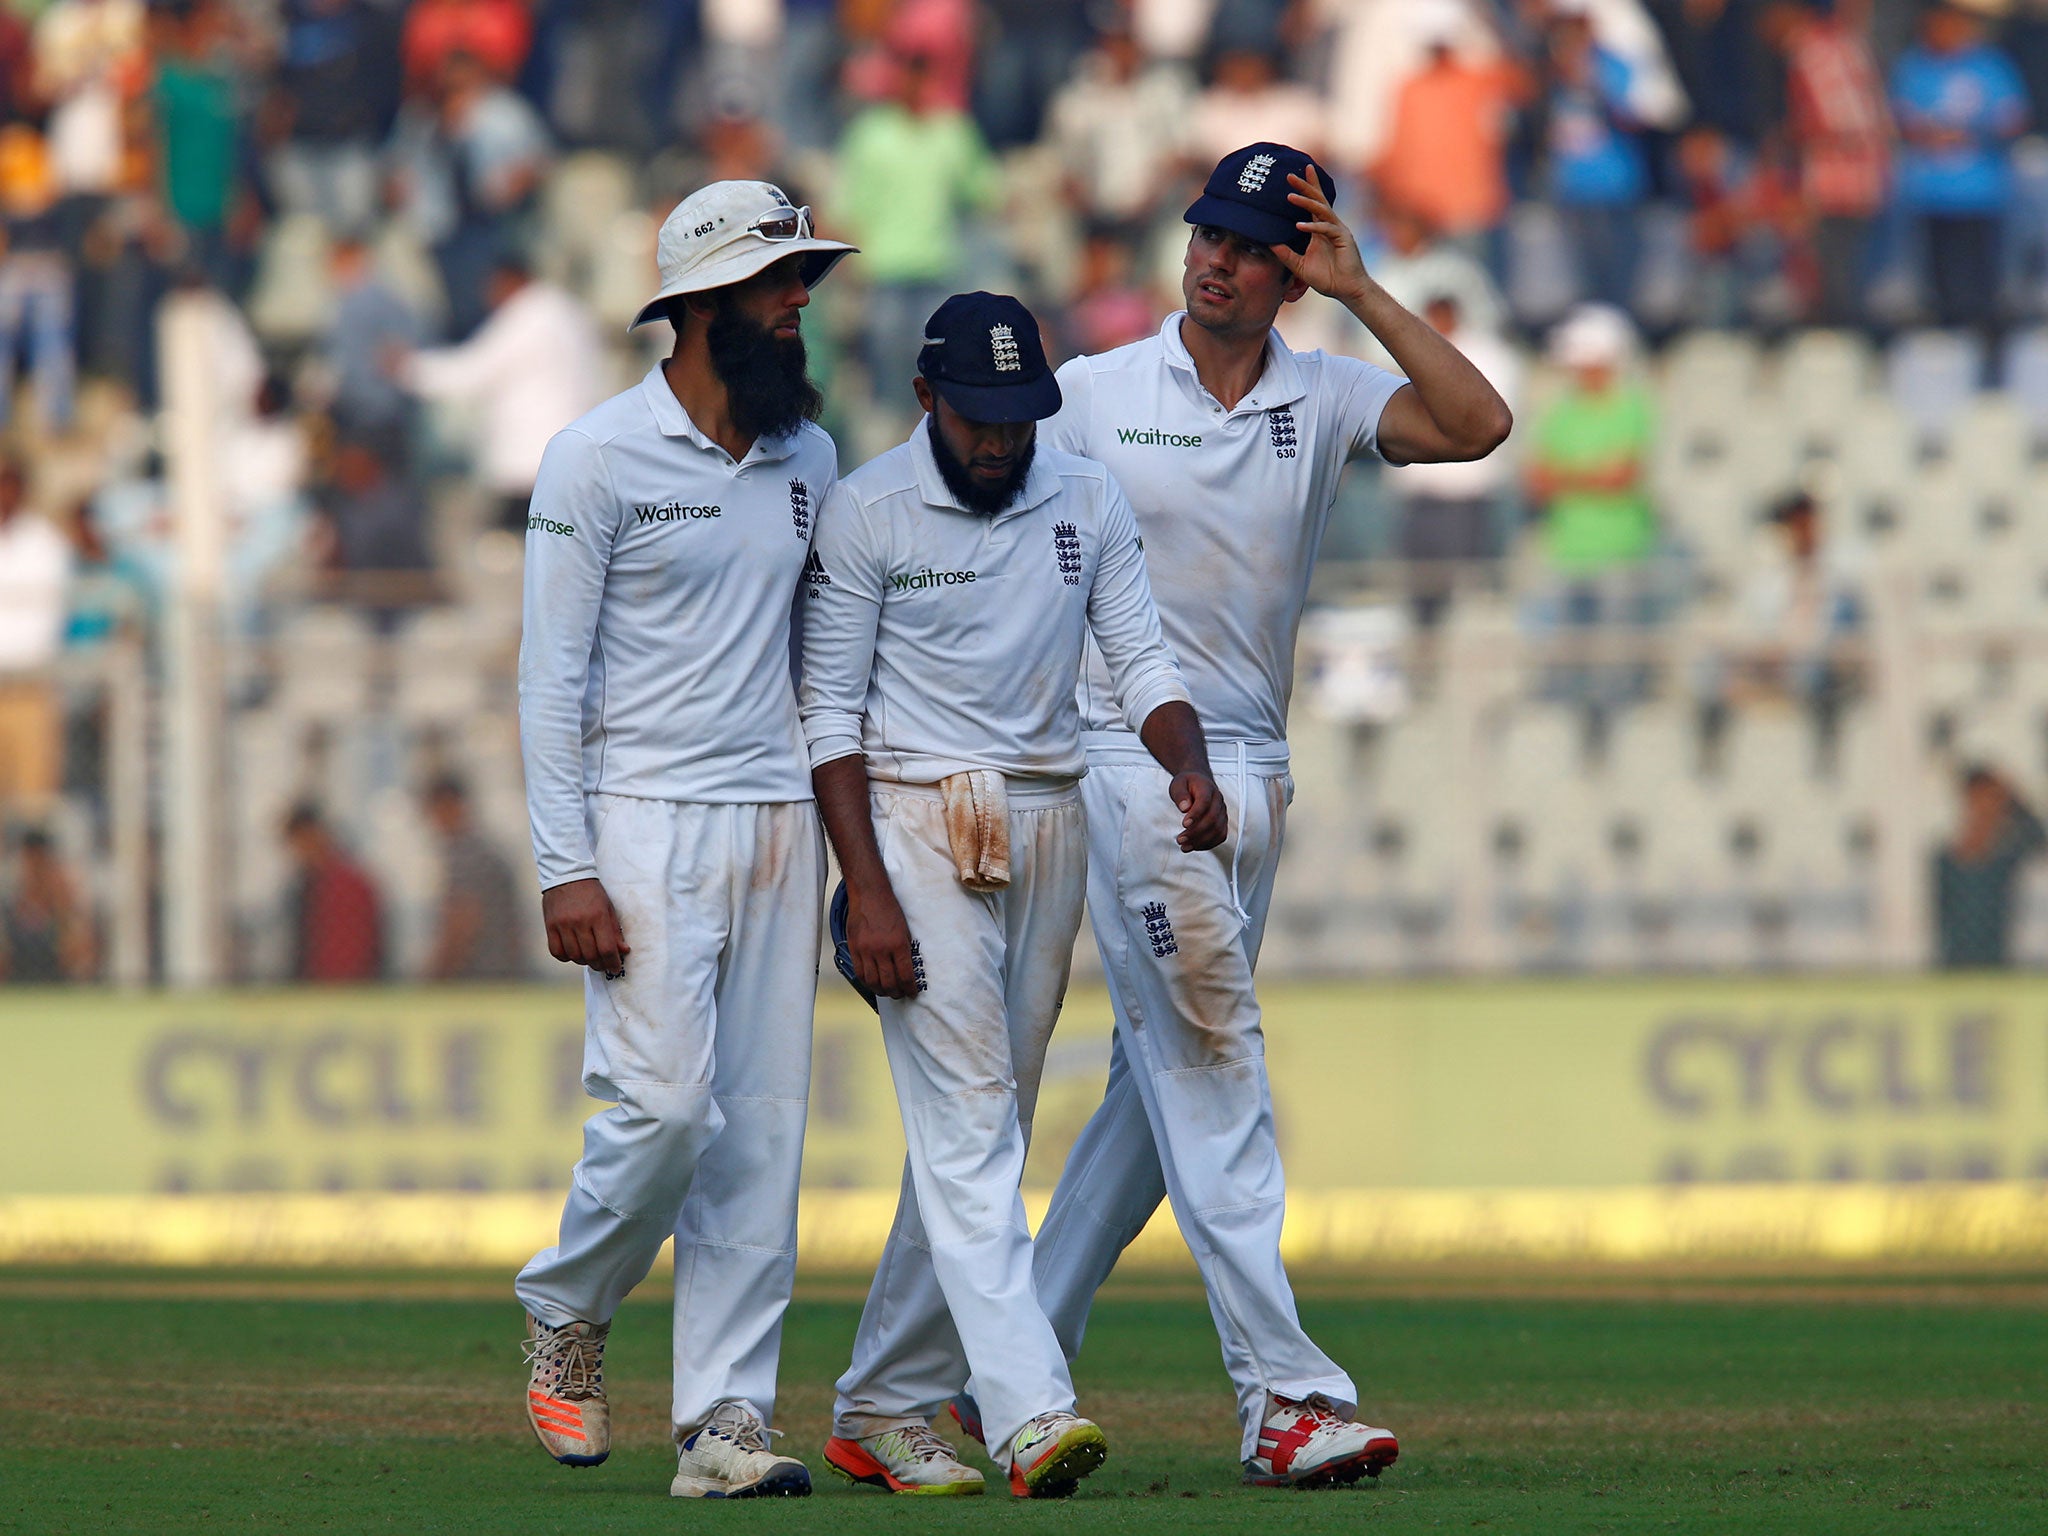 Adil Rashid did not have the full backing of his captain